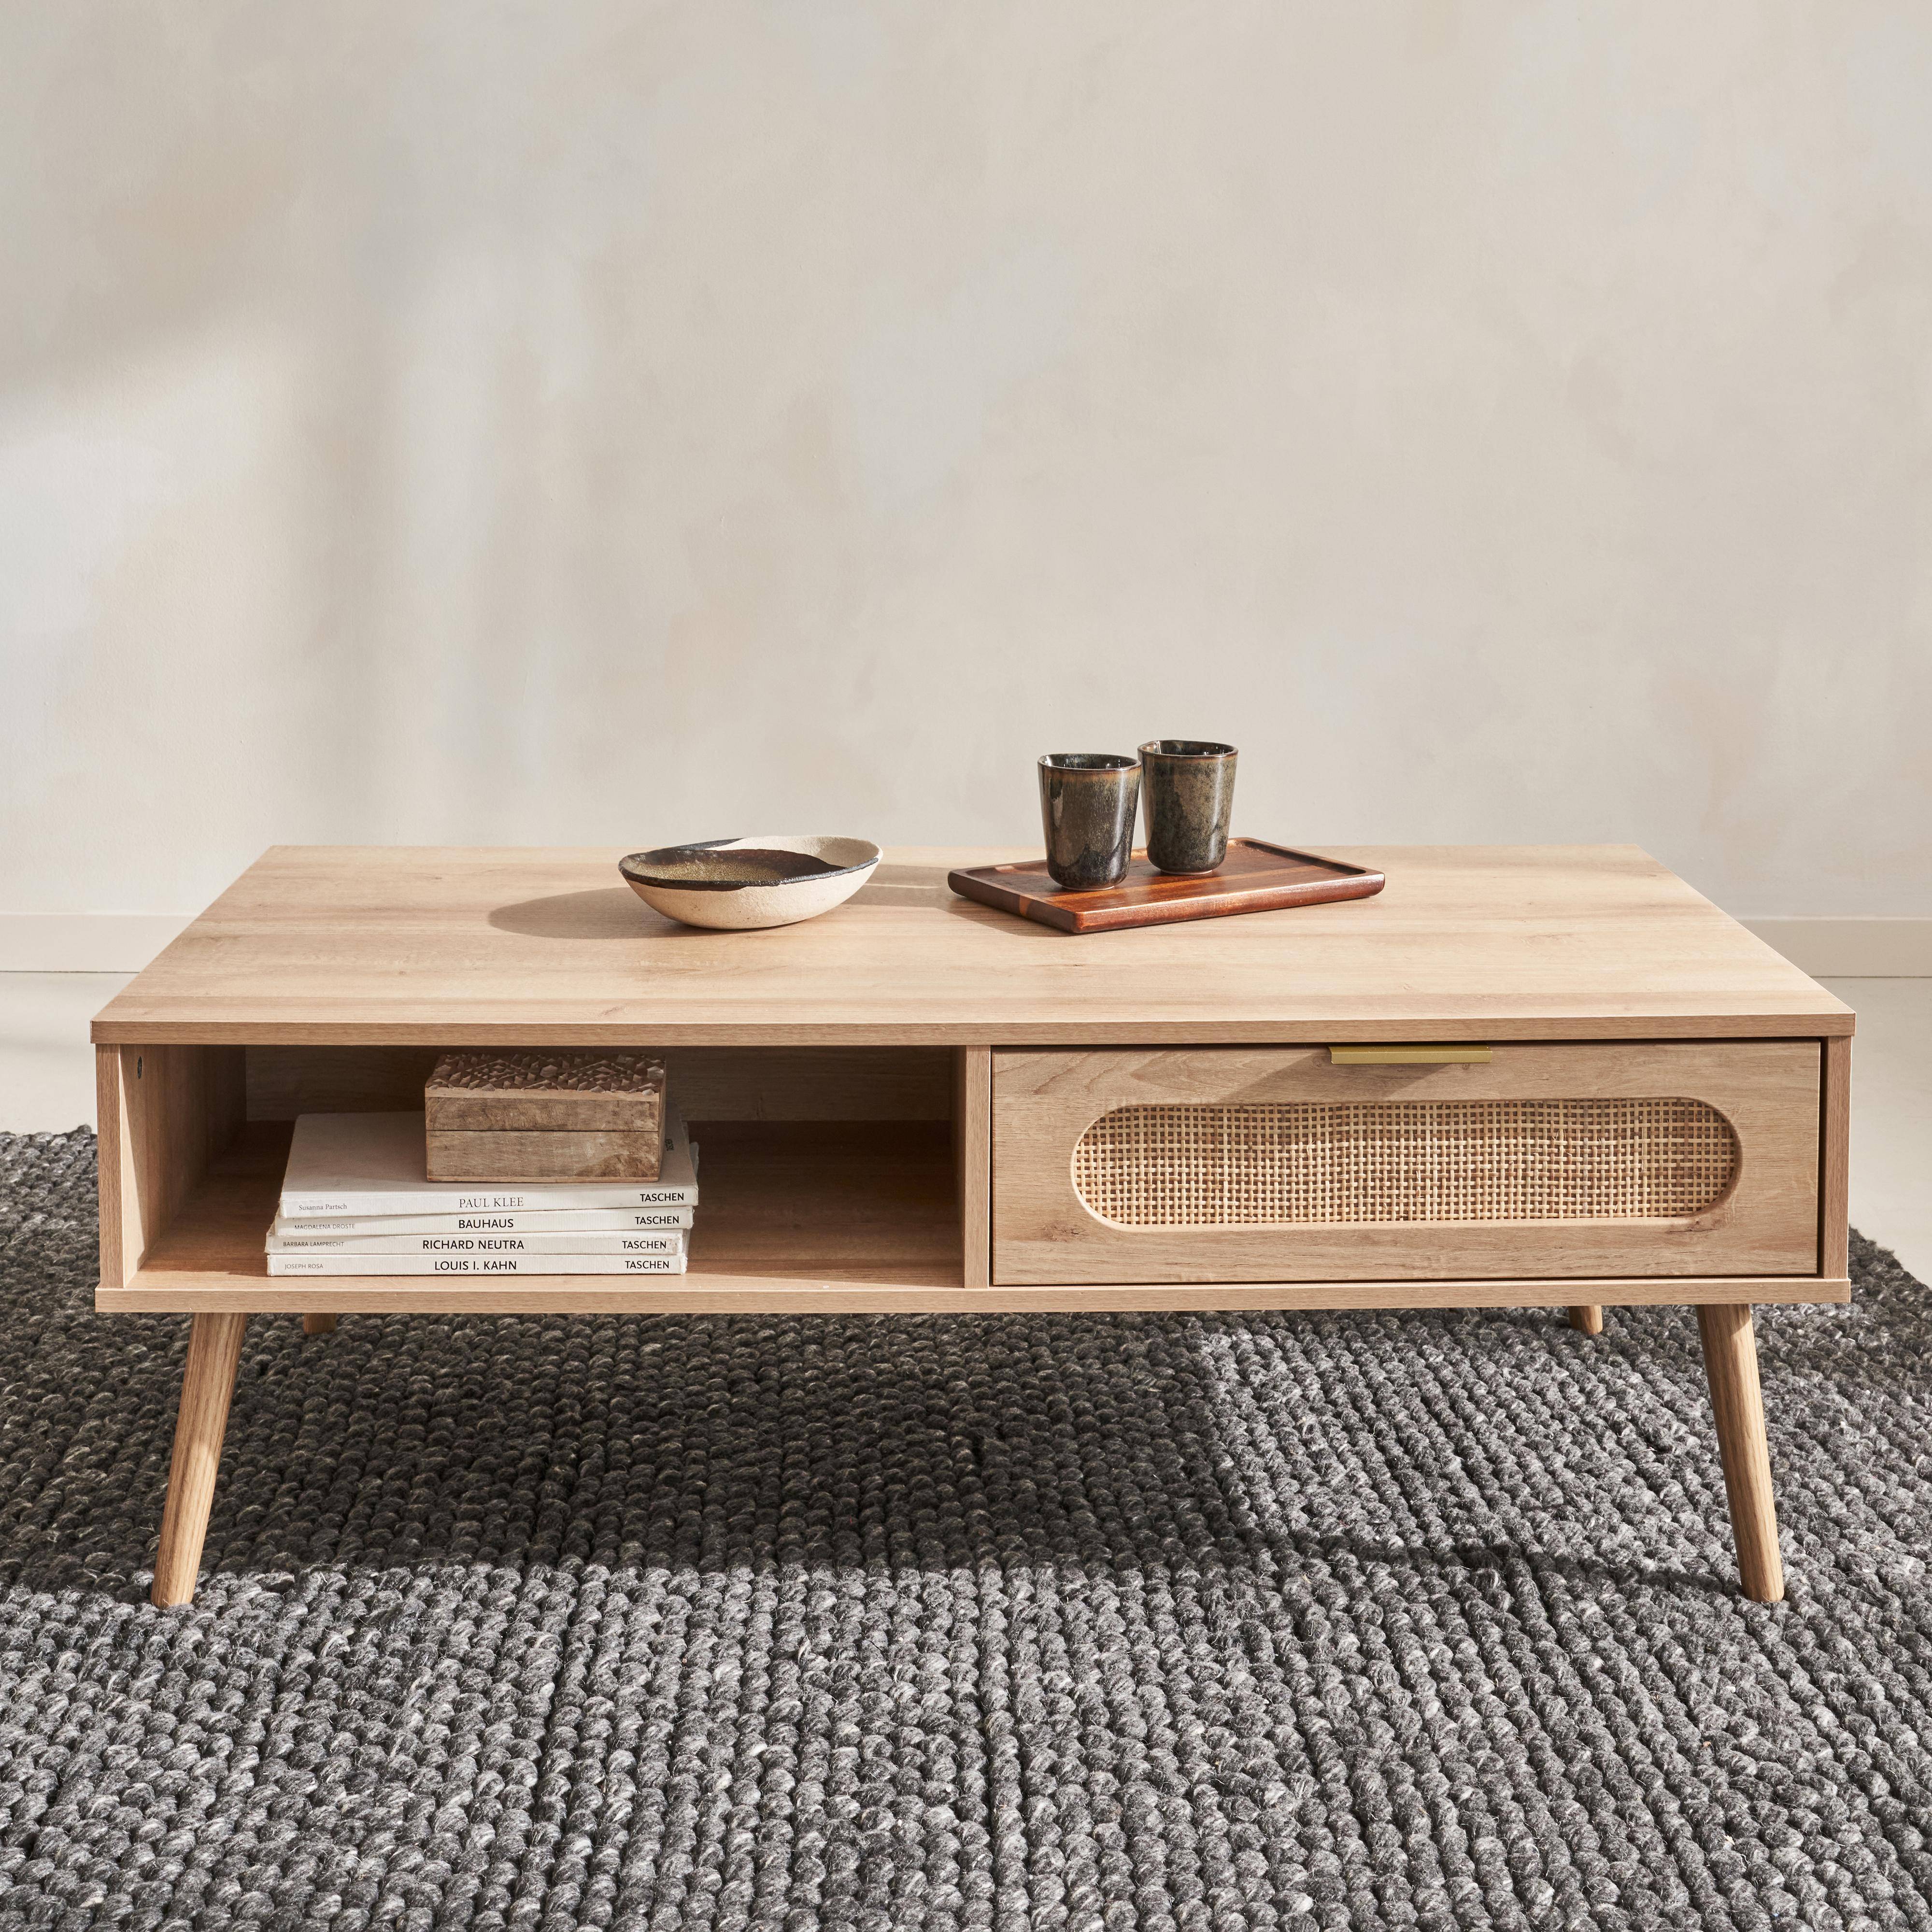 Wood and rounded cane rattan coffee table, 110x59x39cm, Eva, 1 drawer, 2 storage spaces Photo1